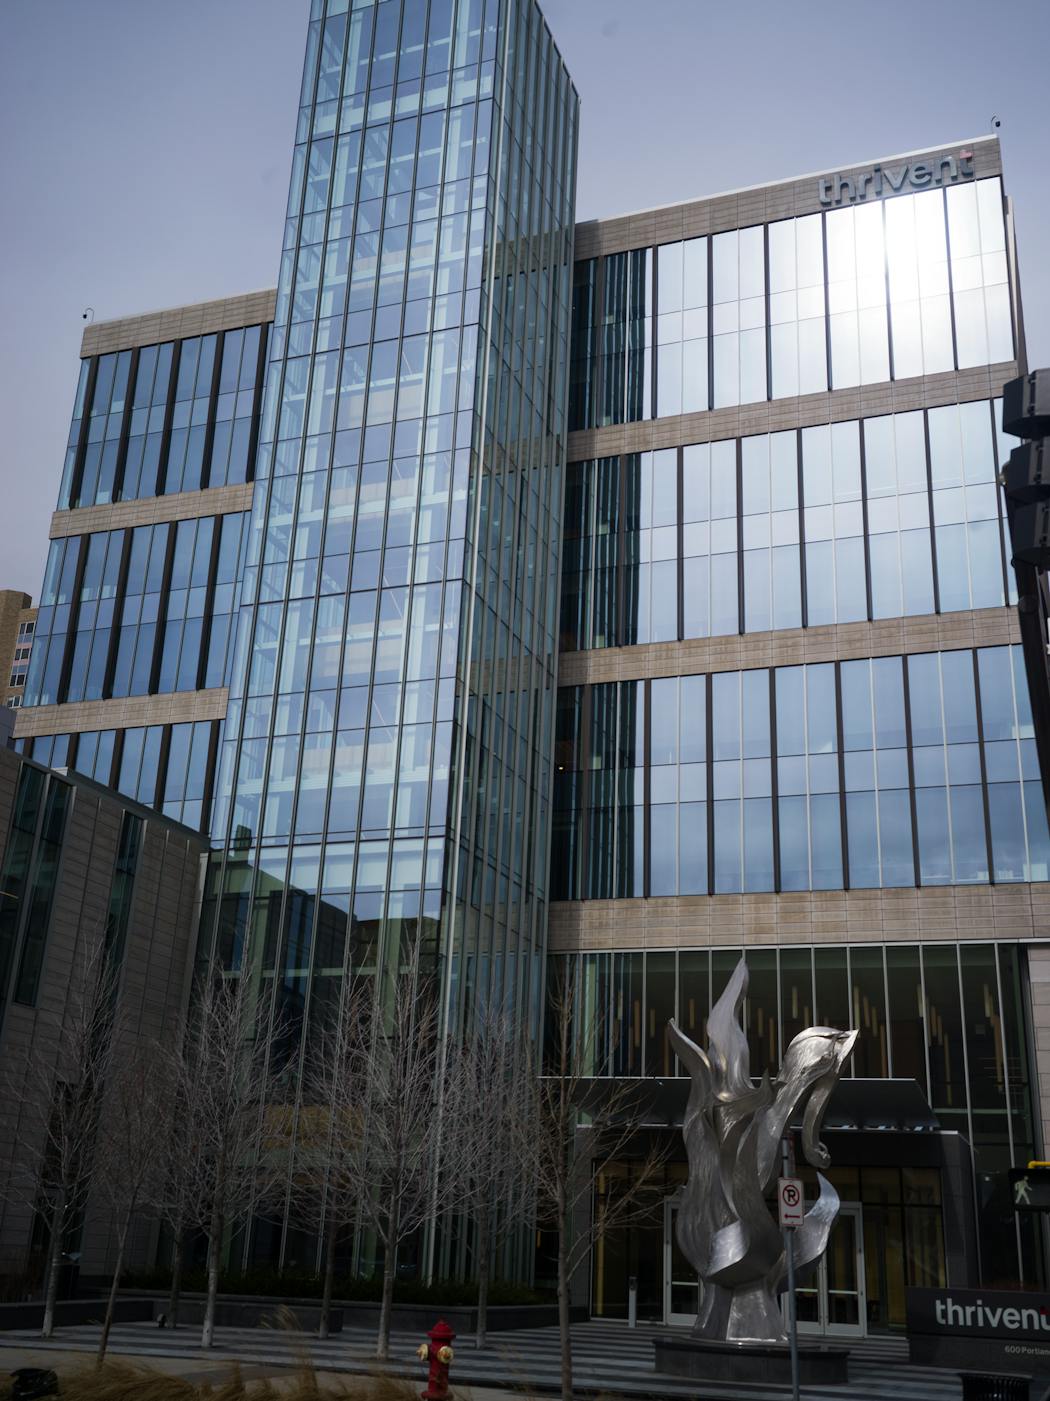 The Thrivent building is one of the newer office structures in downtown Minneapolis.